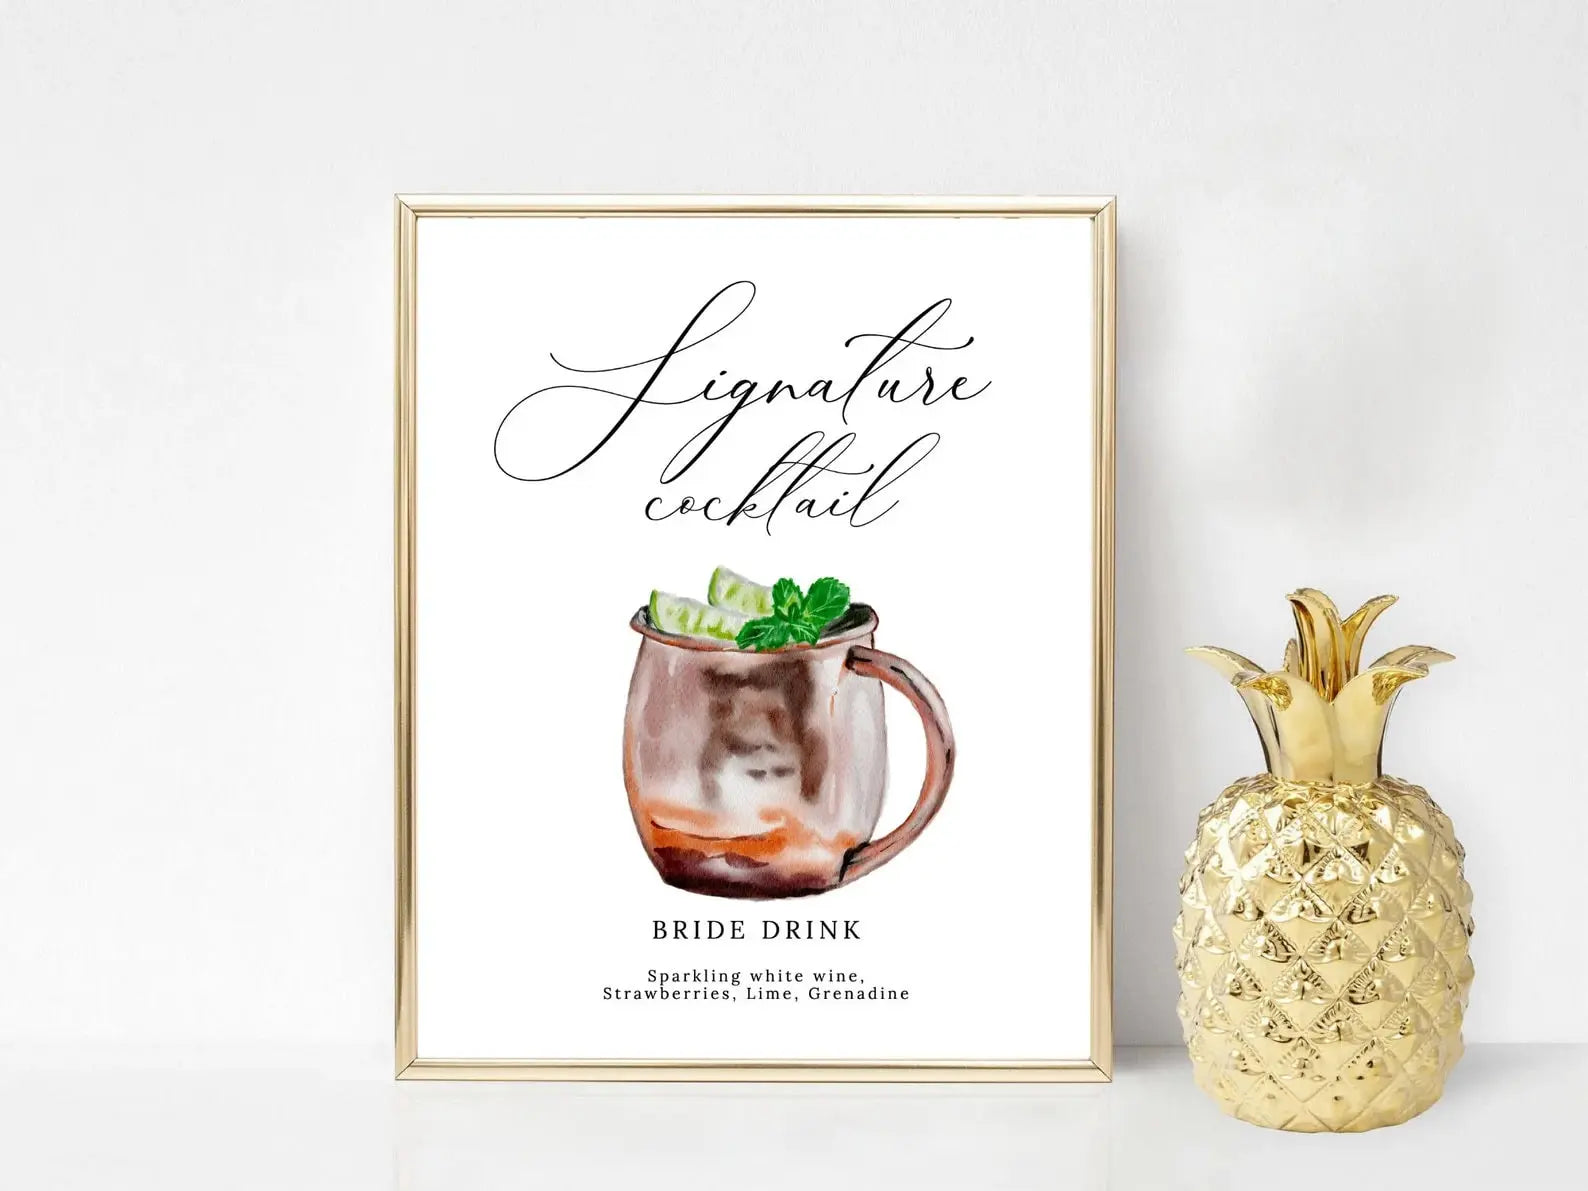 Printable Signature Cocktails Sign | Moscow Mule Signature Cocktails Template | Printable Bar Menu Sign Template | Signature Drinks Sign The Wedding Crest Lab